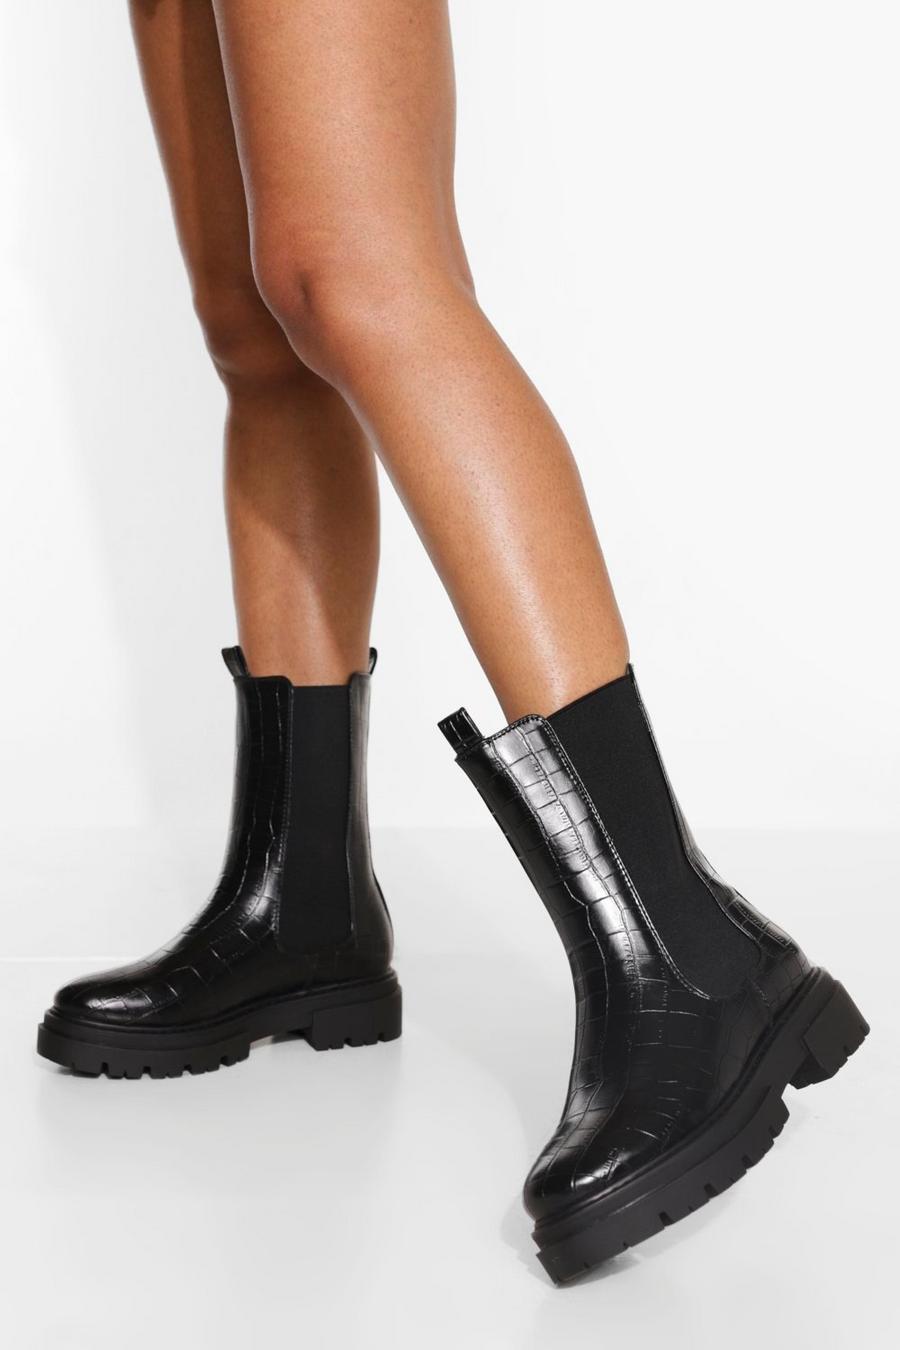 Black Wide Width Croc Chunky Calf High Chelsea Boots image number 1